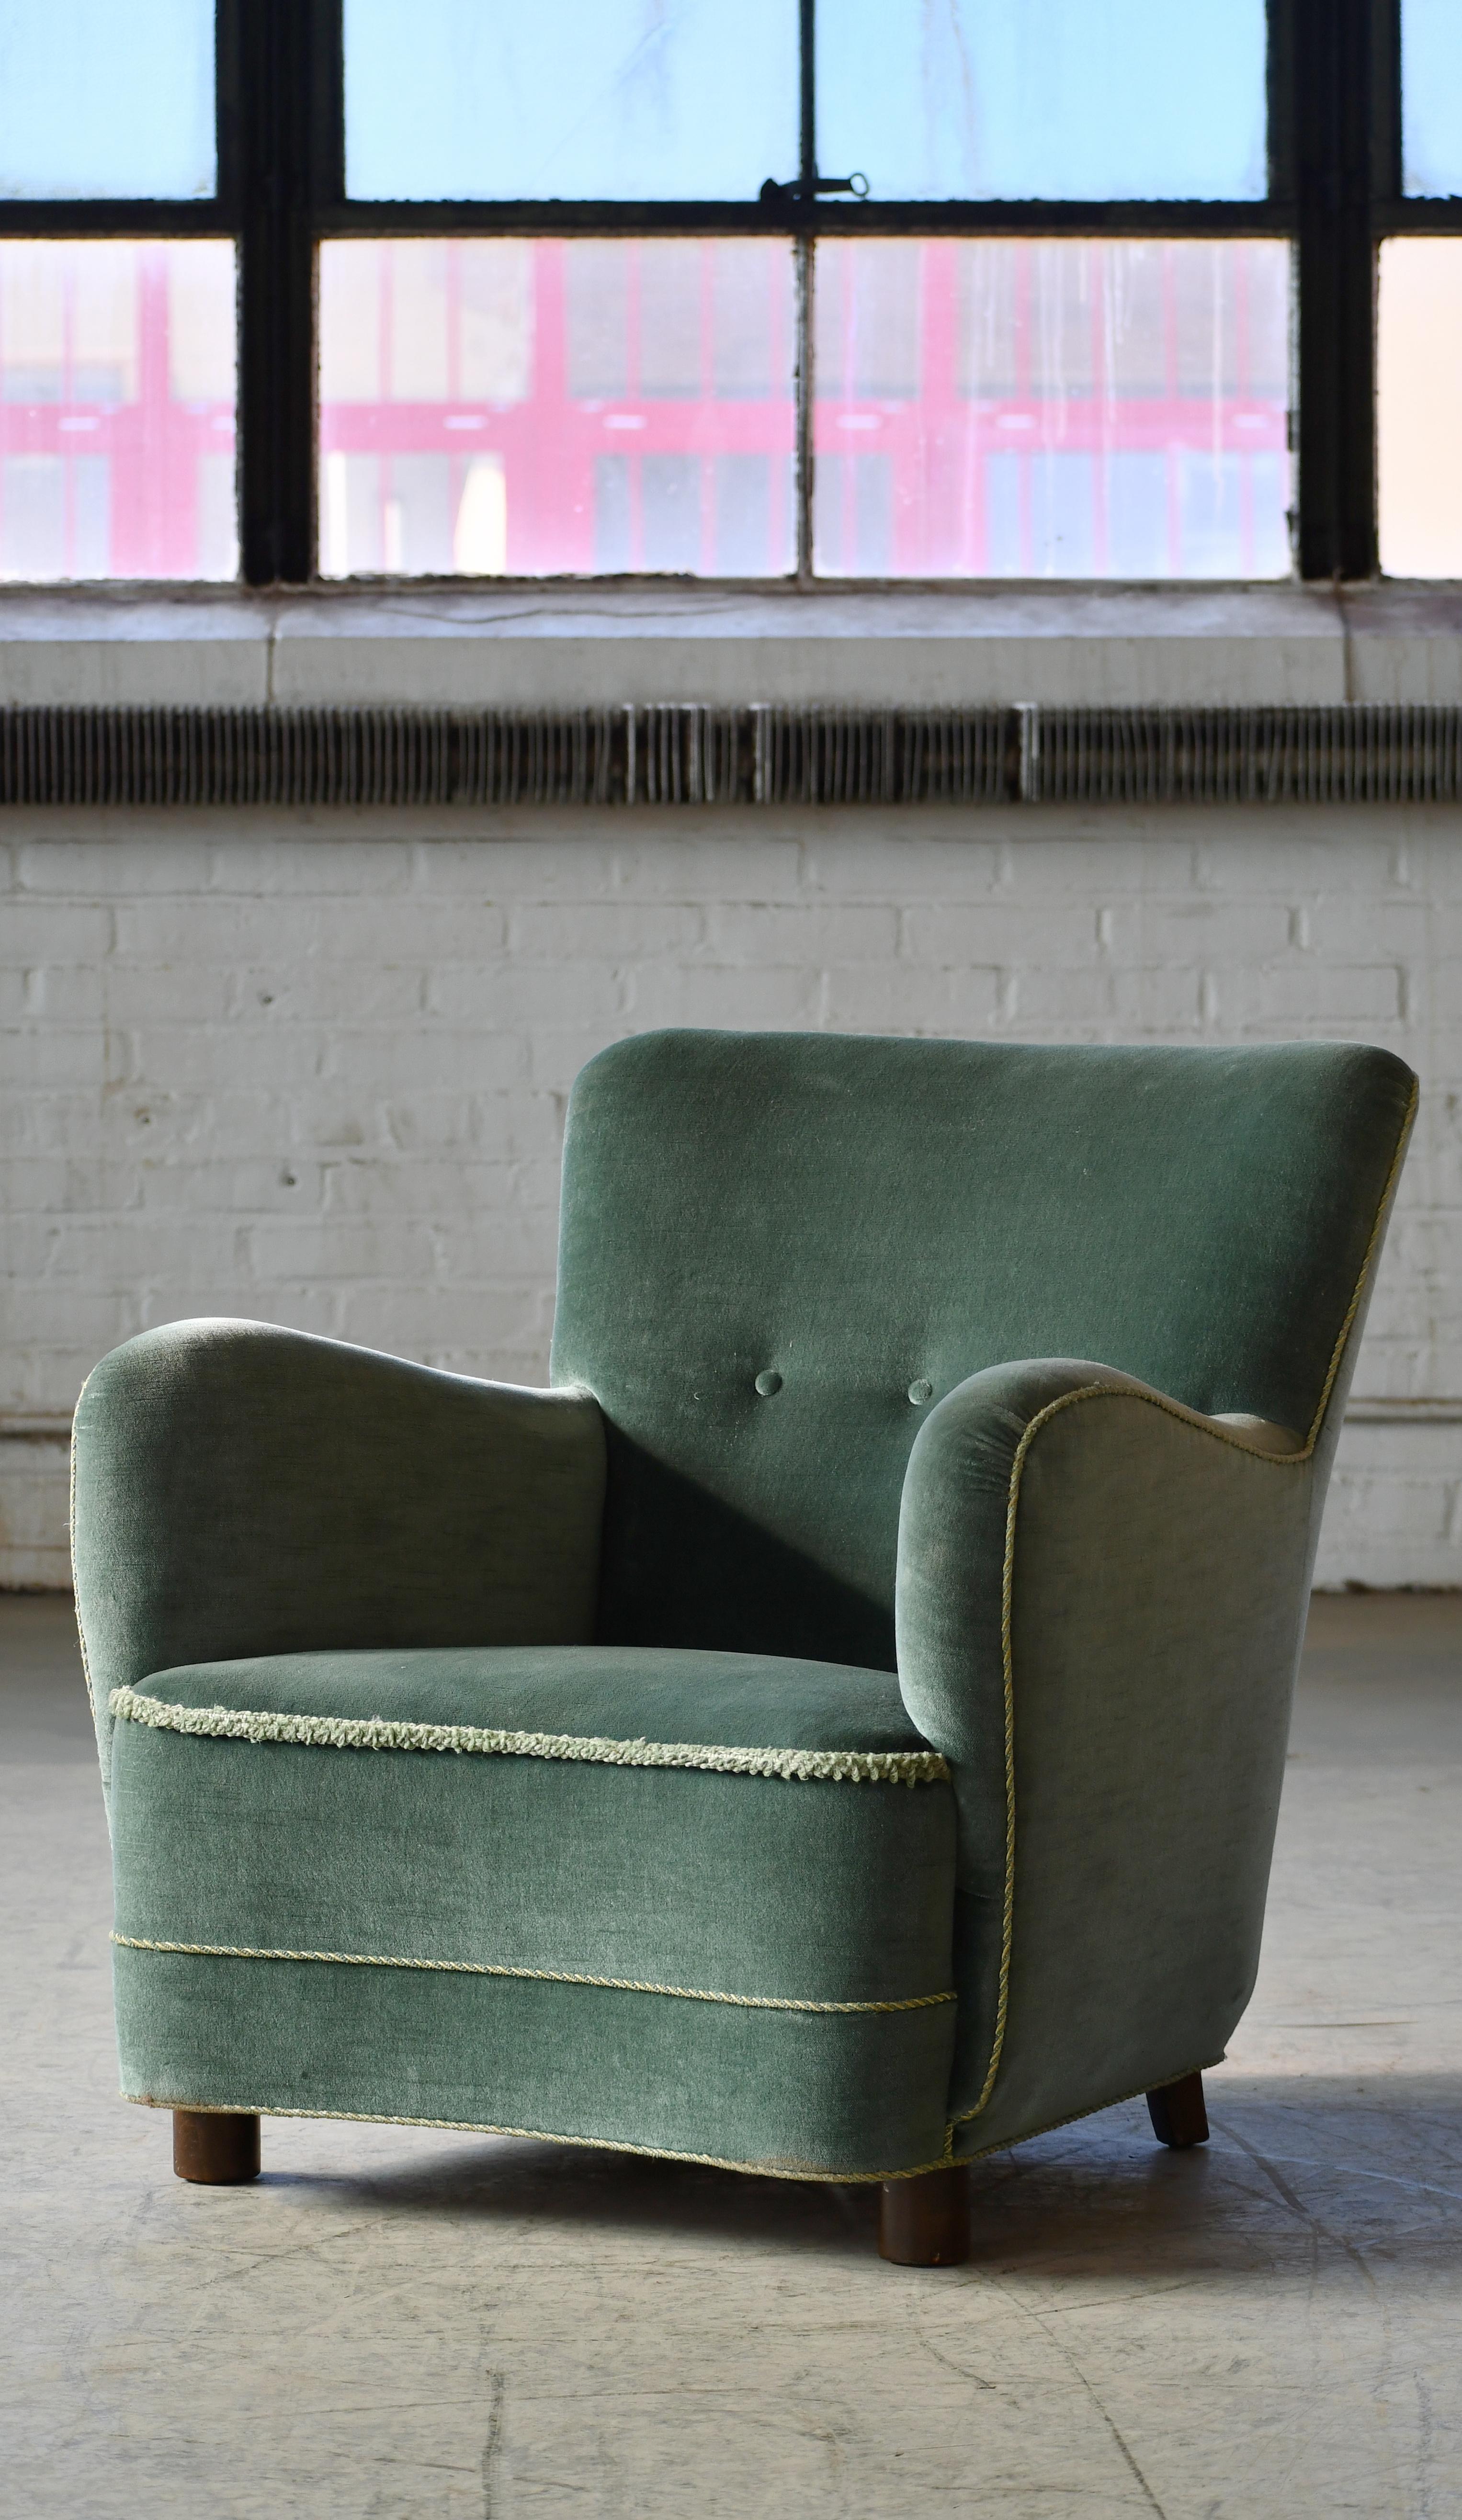 Beech Danish Art Deco or Early Midcentury Lounge Chair in Green Mohair 1930-40s For Sale